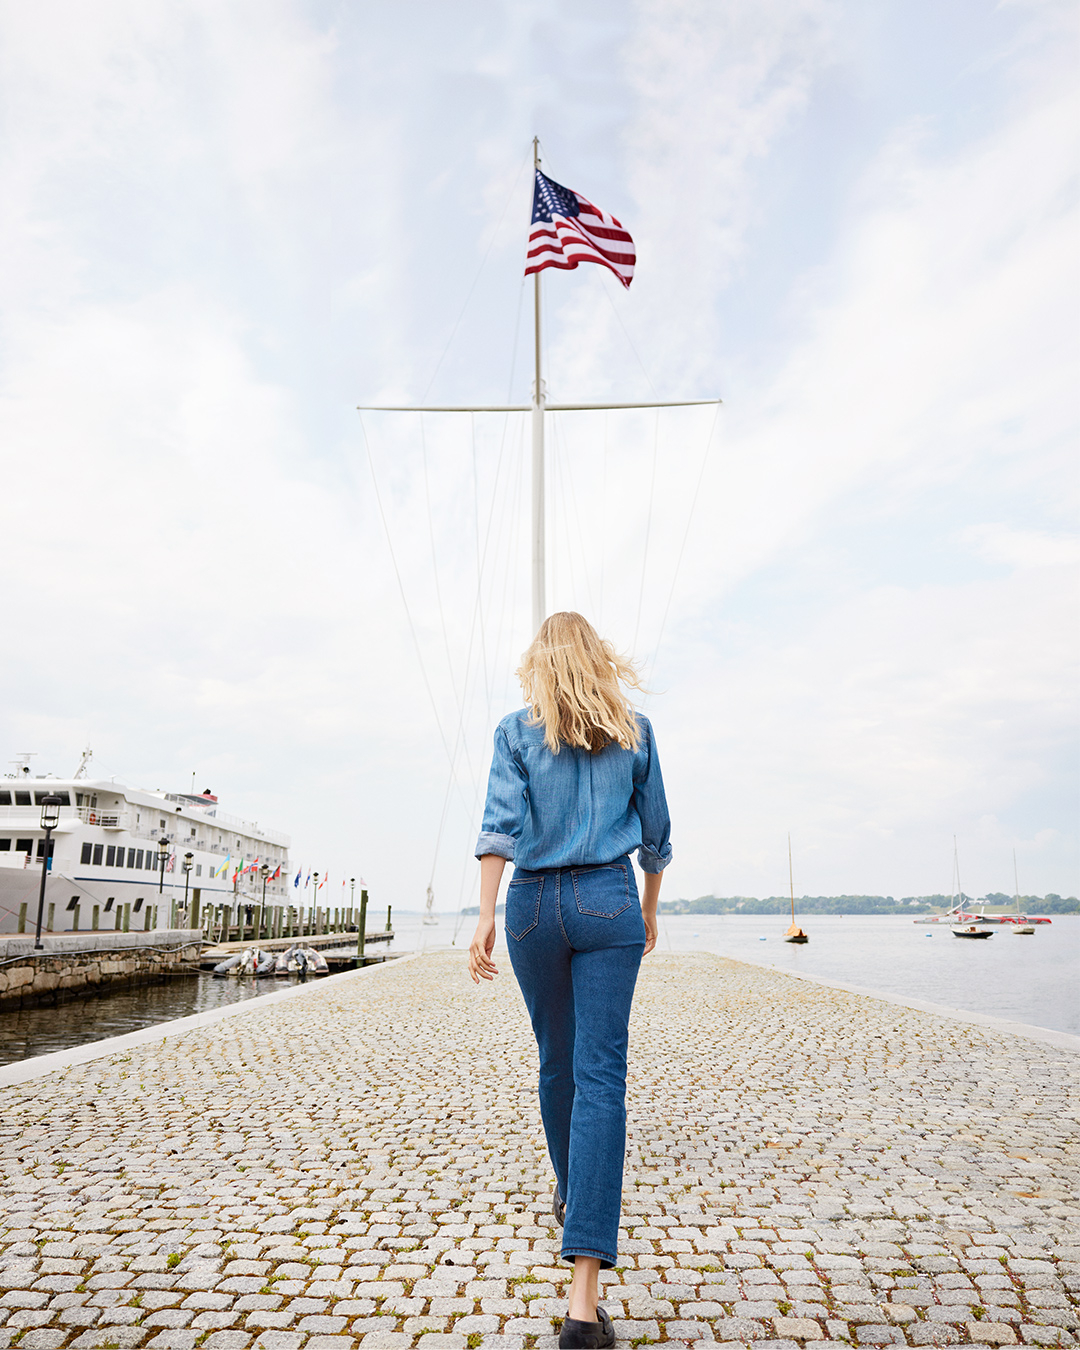 Revolve and Recover™ sustainable denim collection